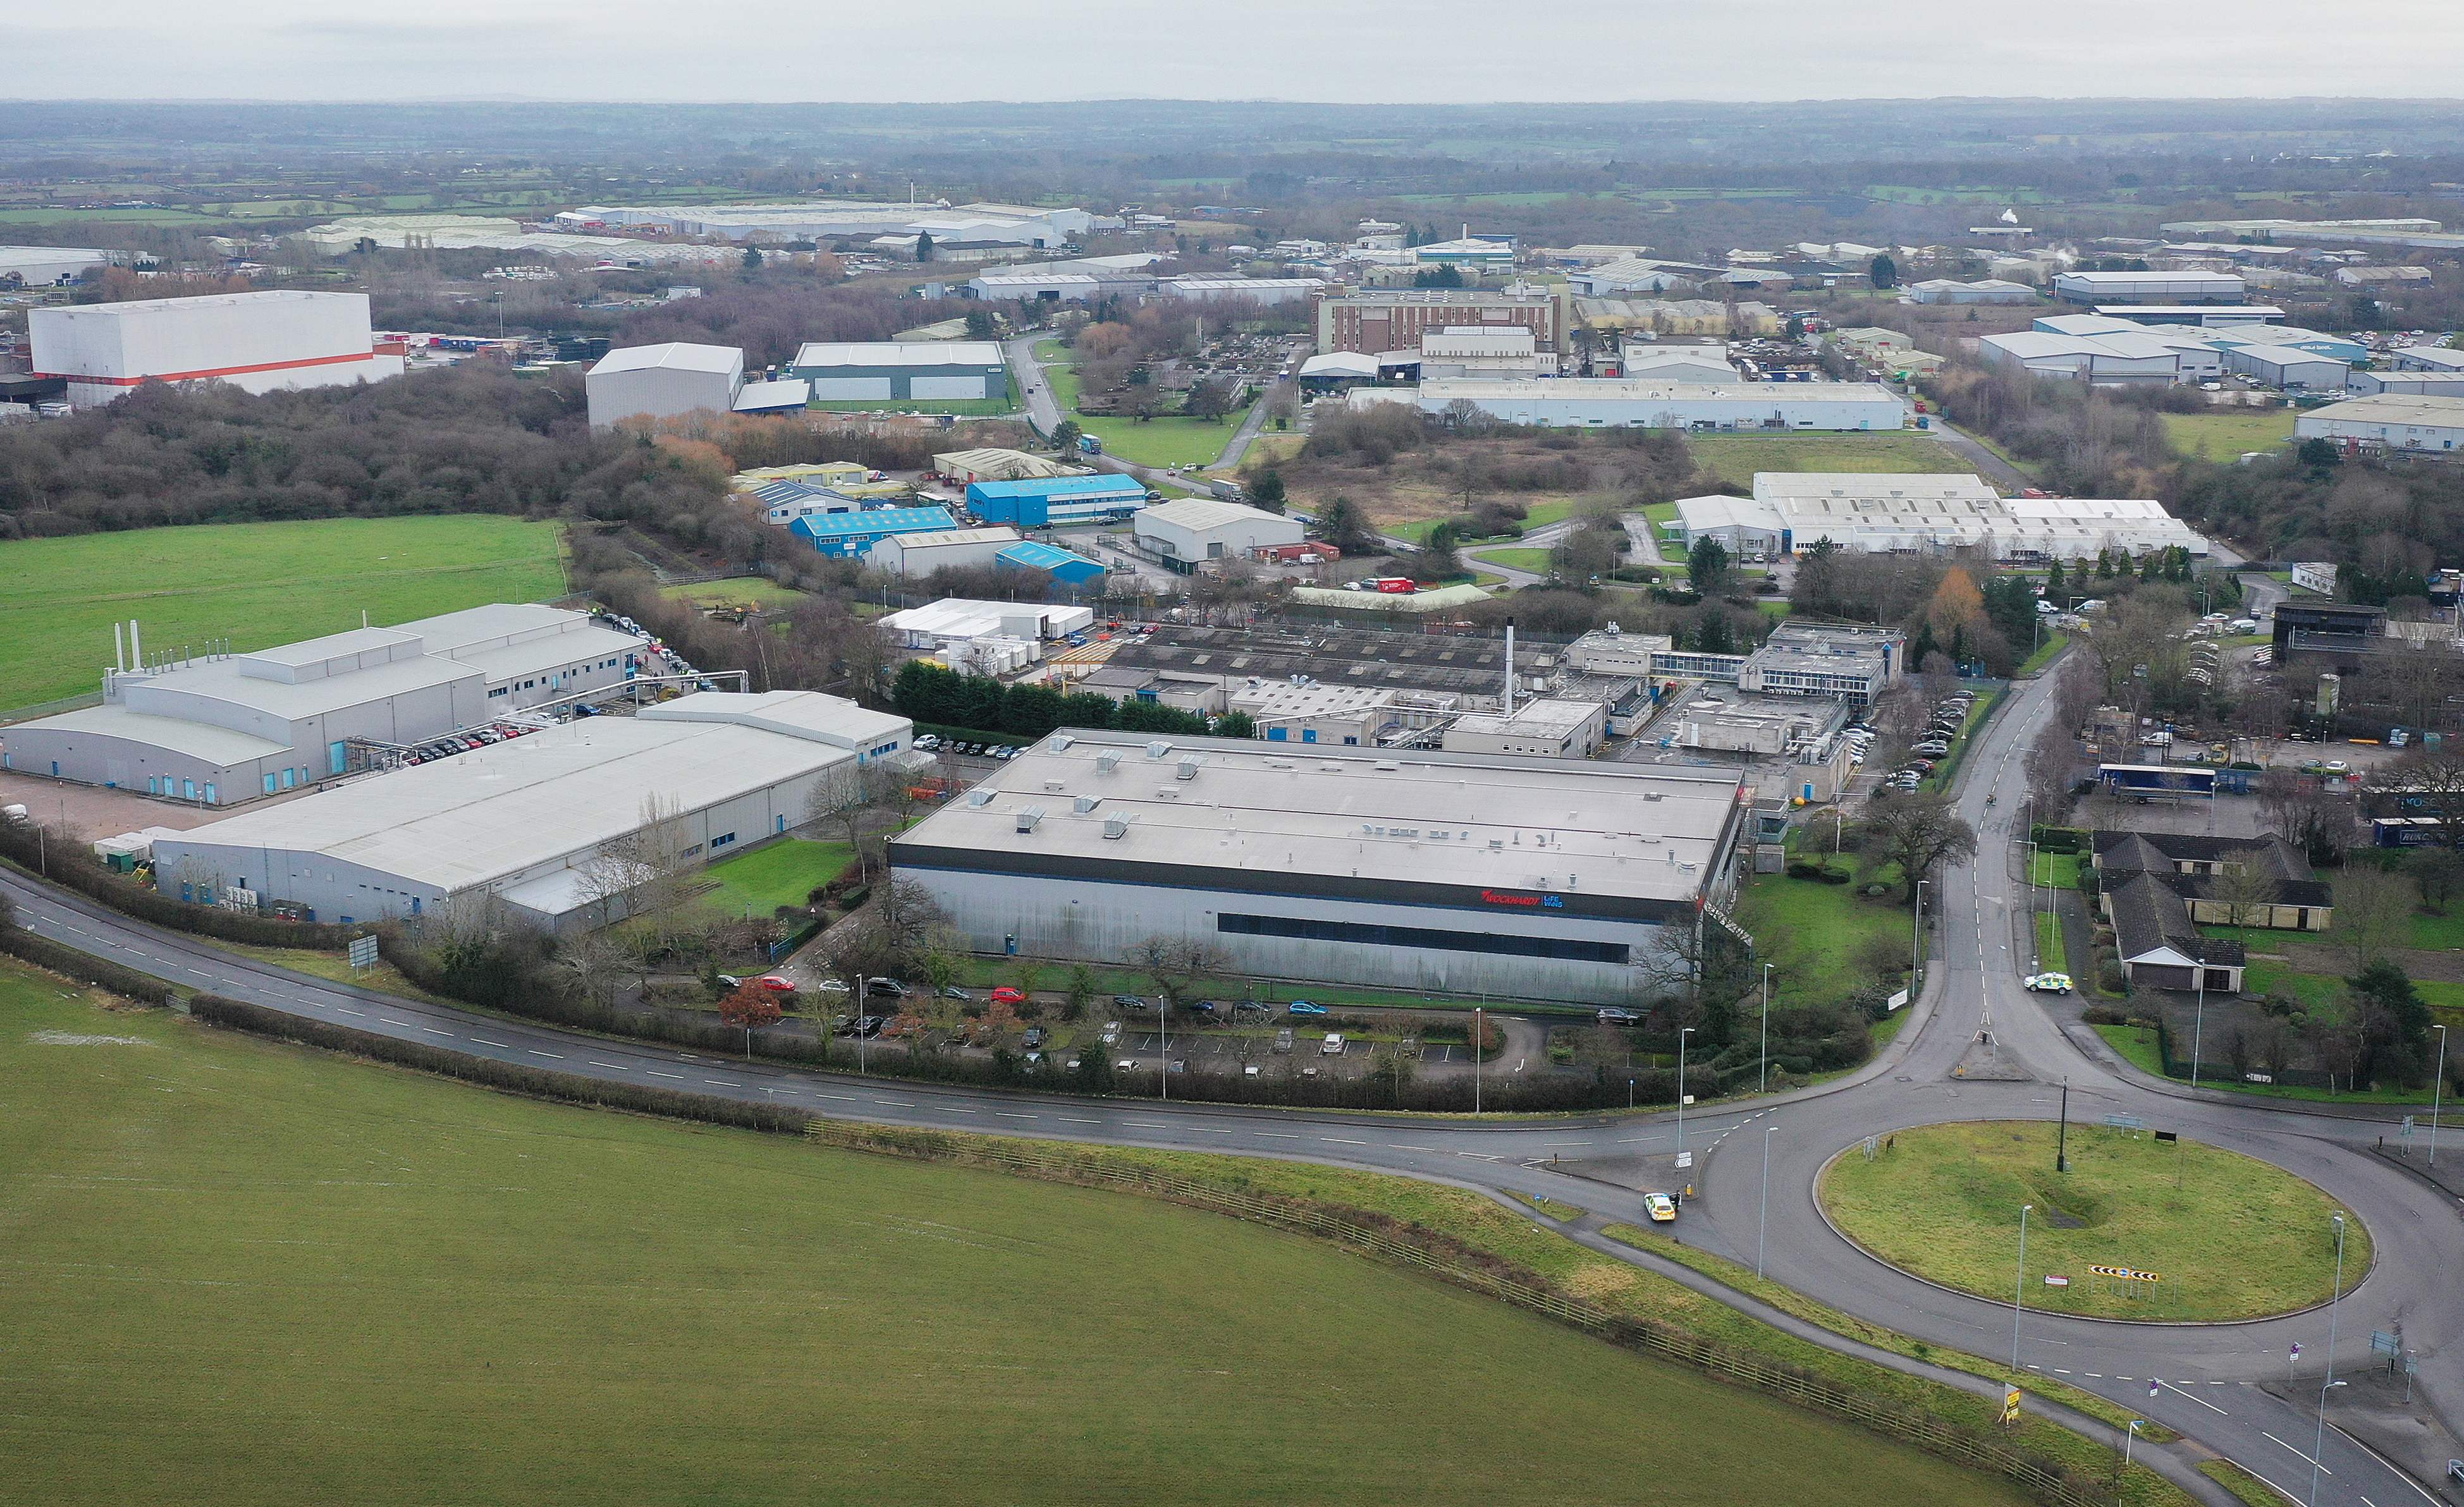 Police cordon off the factory of pharmaceutical and biotechnology company Wockhardt which produces the Covid-19 vaccine in Wrexham, north Wales after reports of a suspicious package on January 27, 2021.